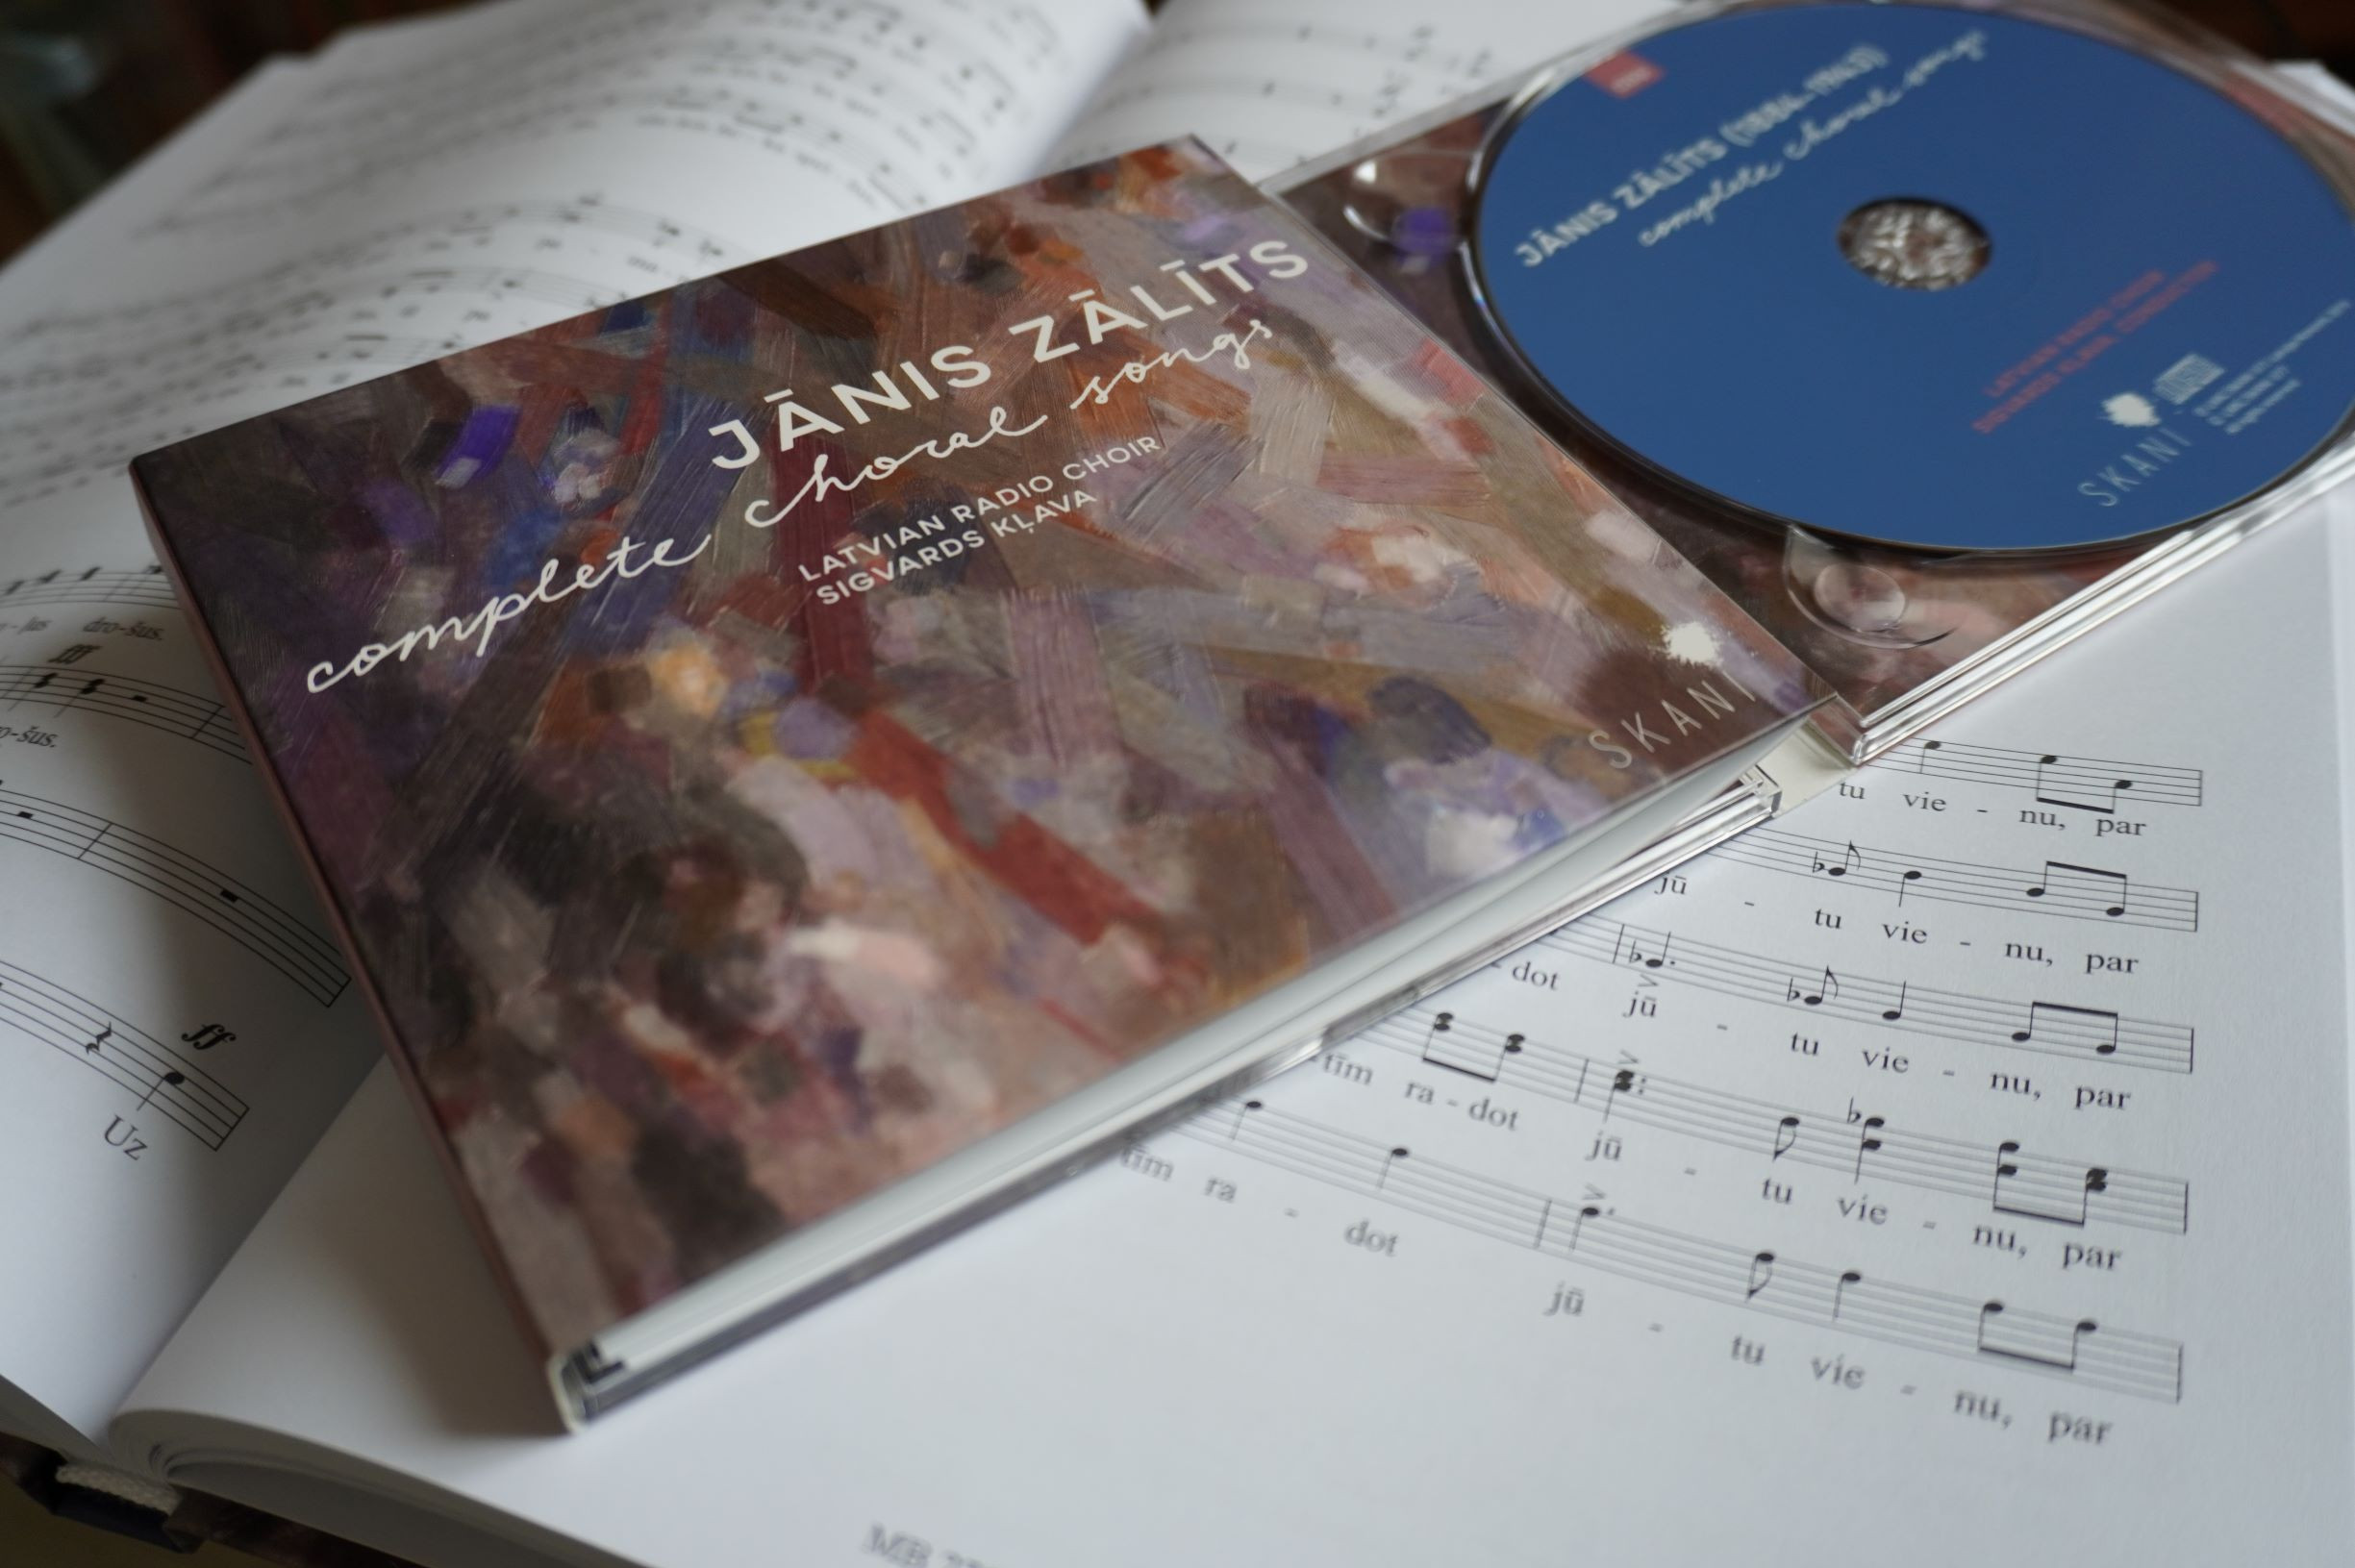 SKANI releases new album of complete choral songs of Jānis Zālīts